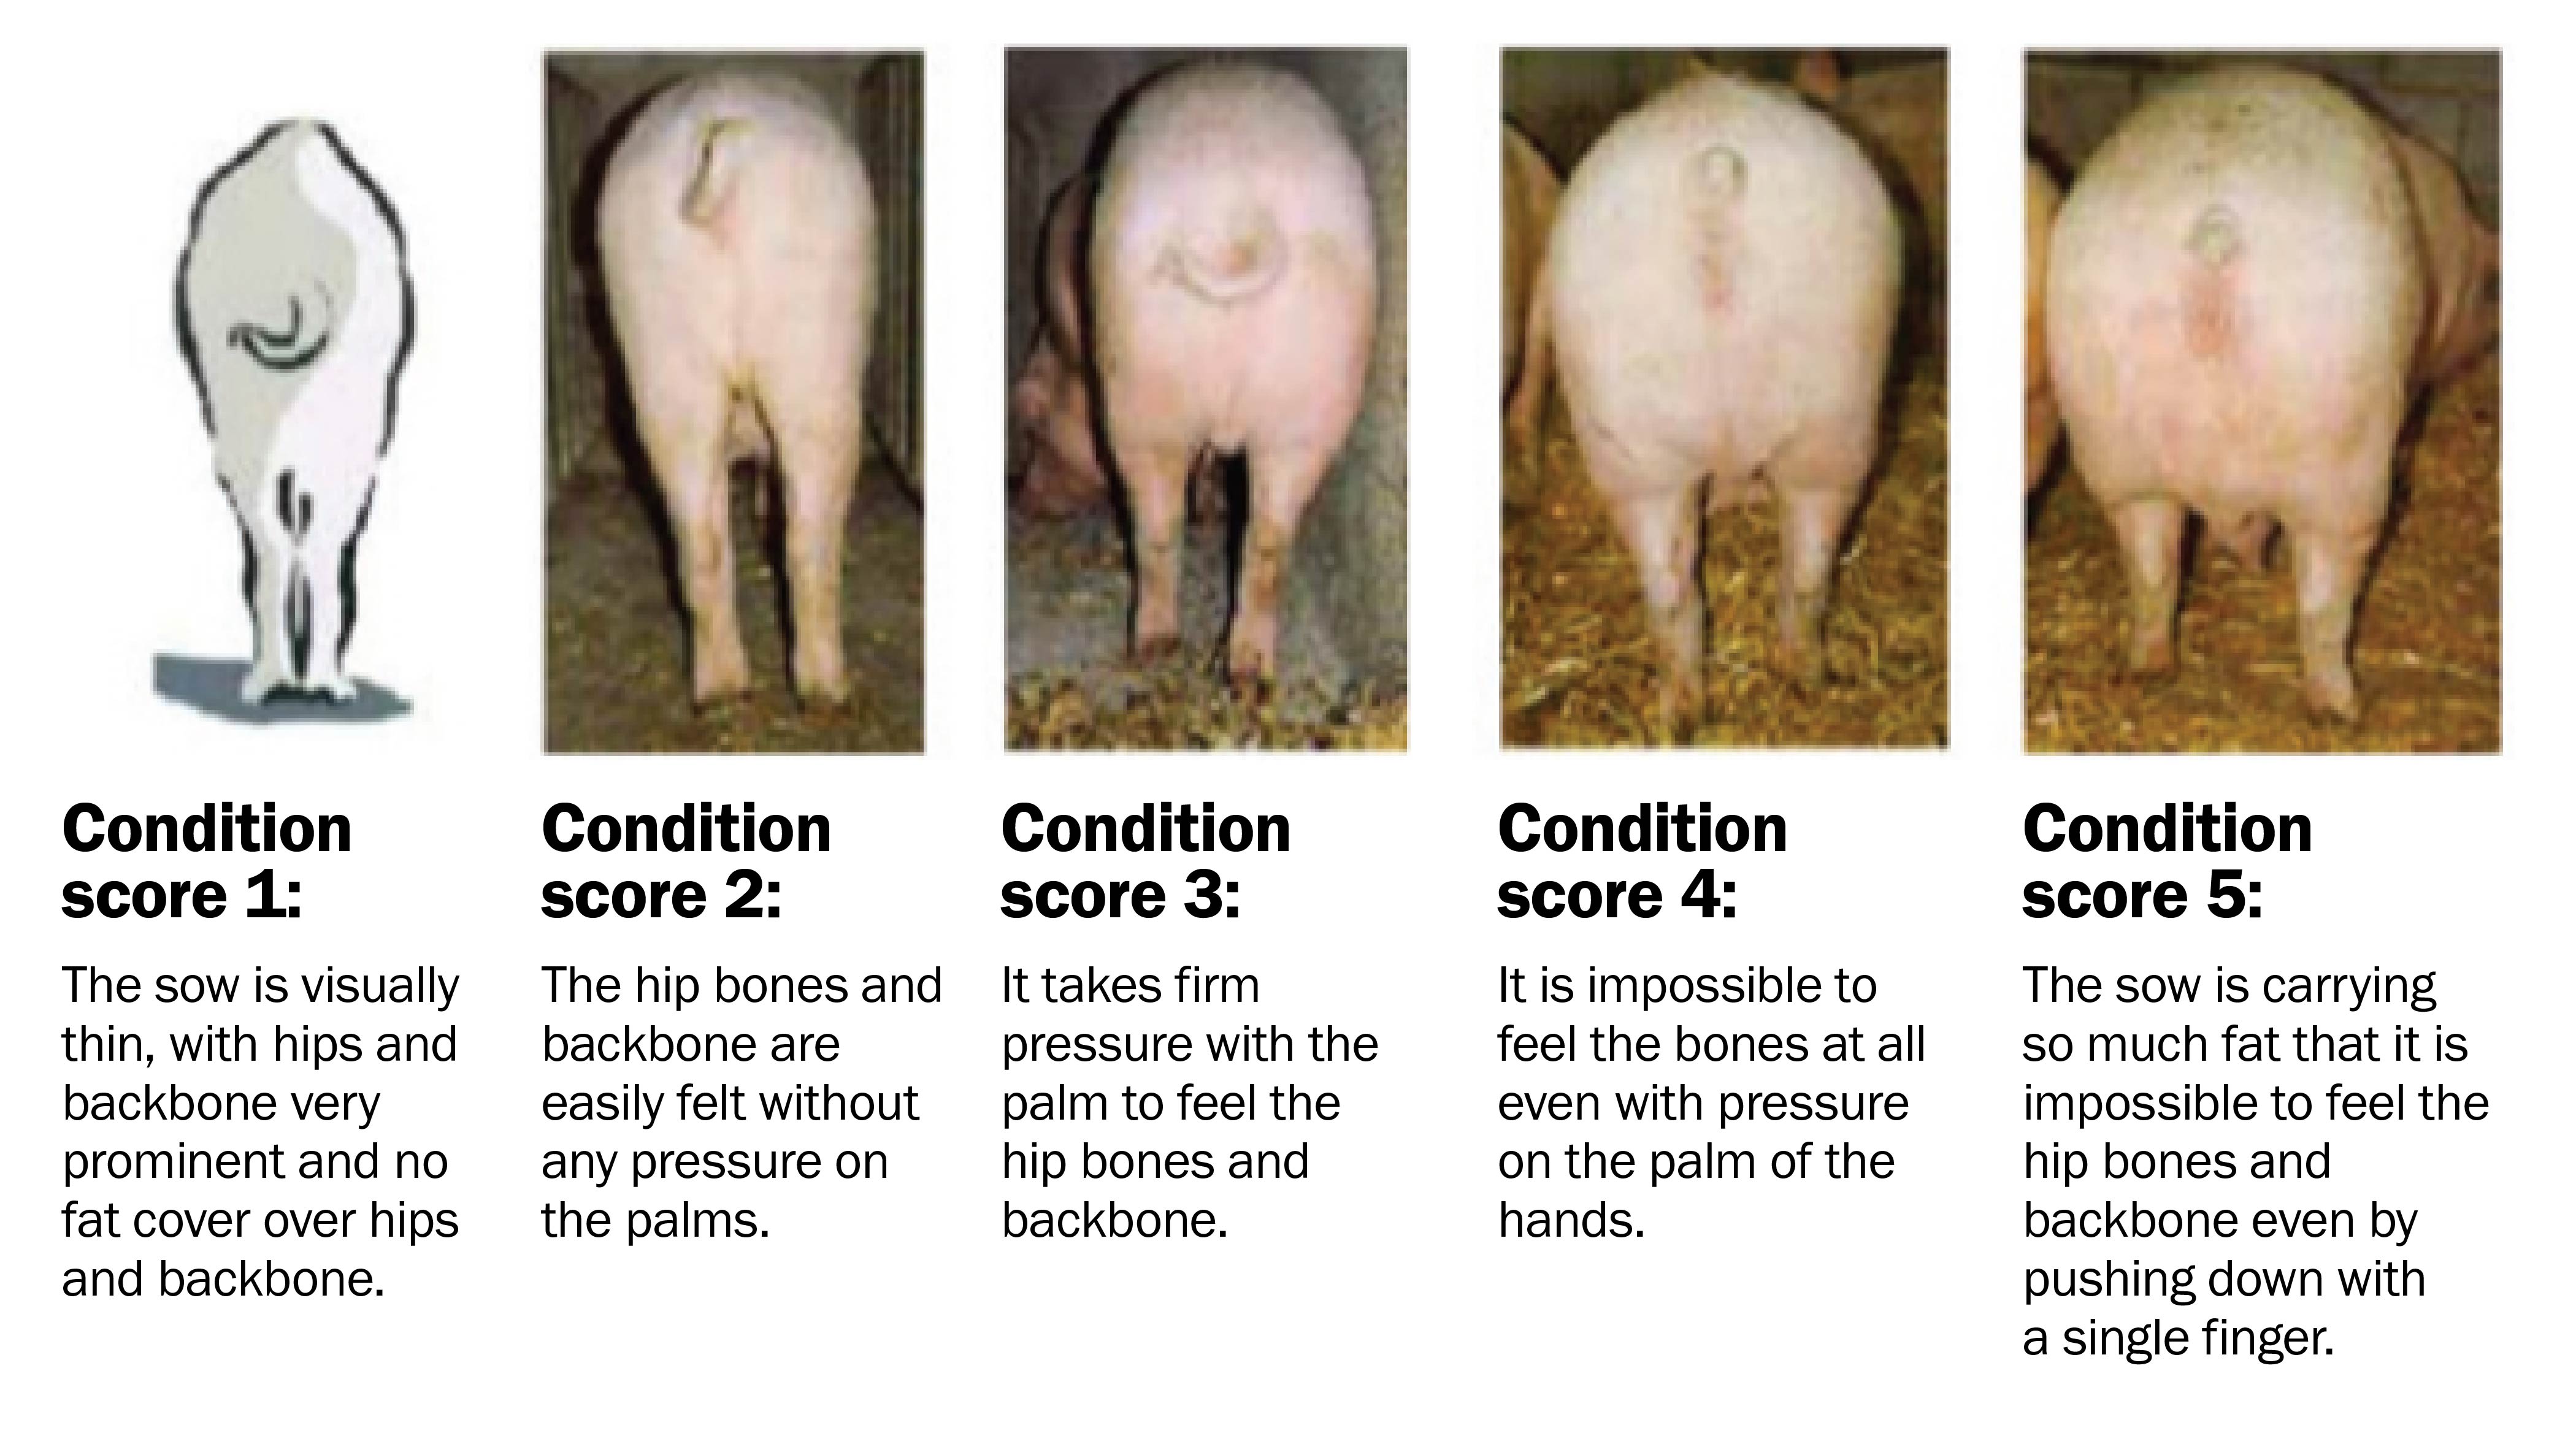 Graphic showing the rear ends of 5 pigs. Under each image from left to right is the description of how to interpret what is felt for each score. The scores range from Condition 1 on the left to Condition 5 on the right.